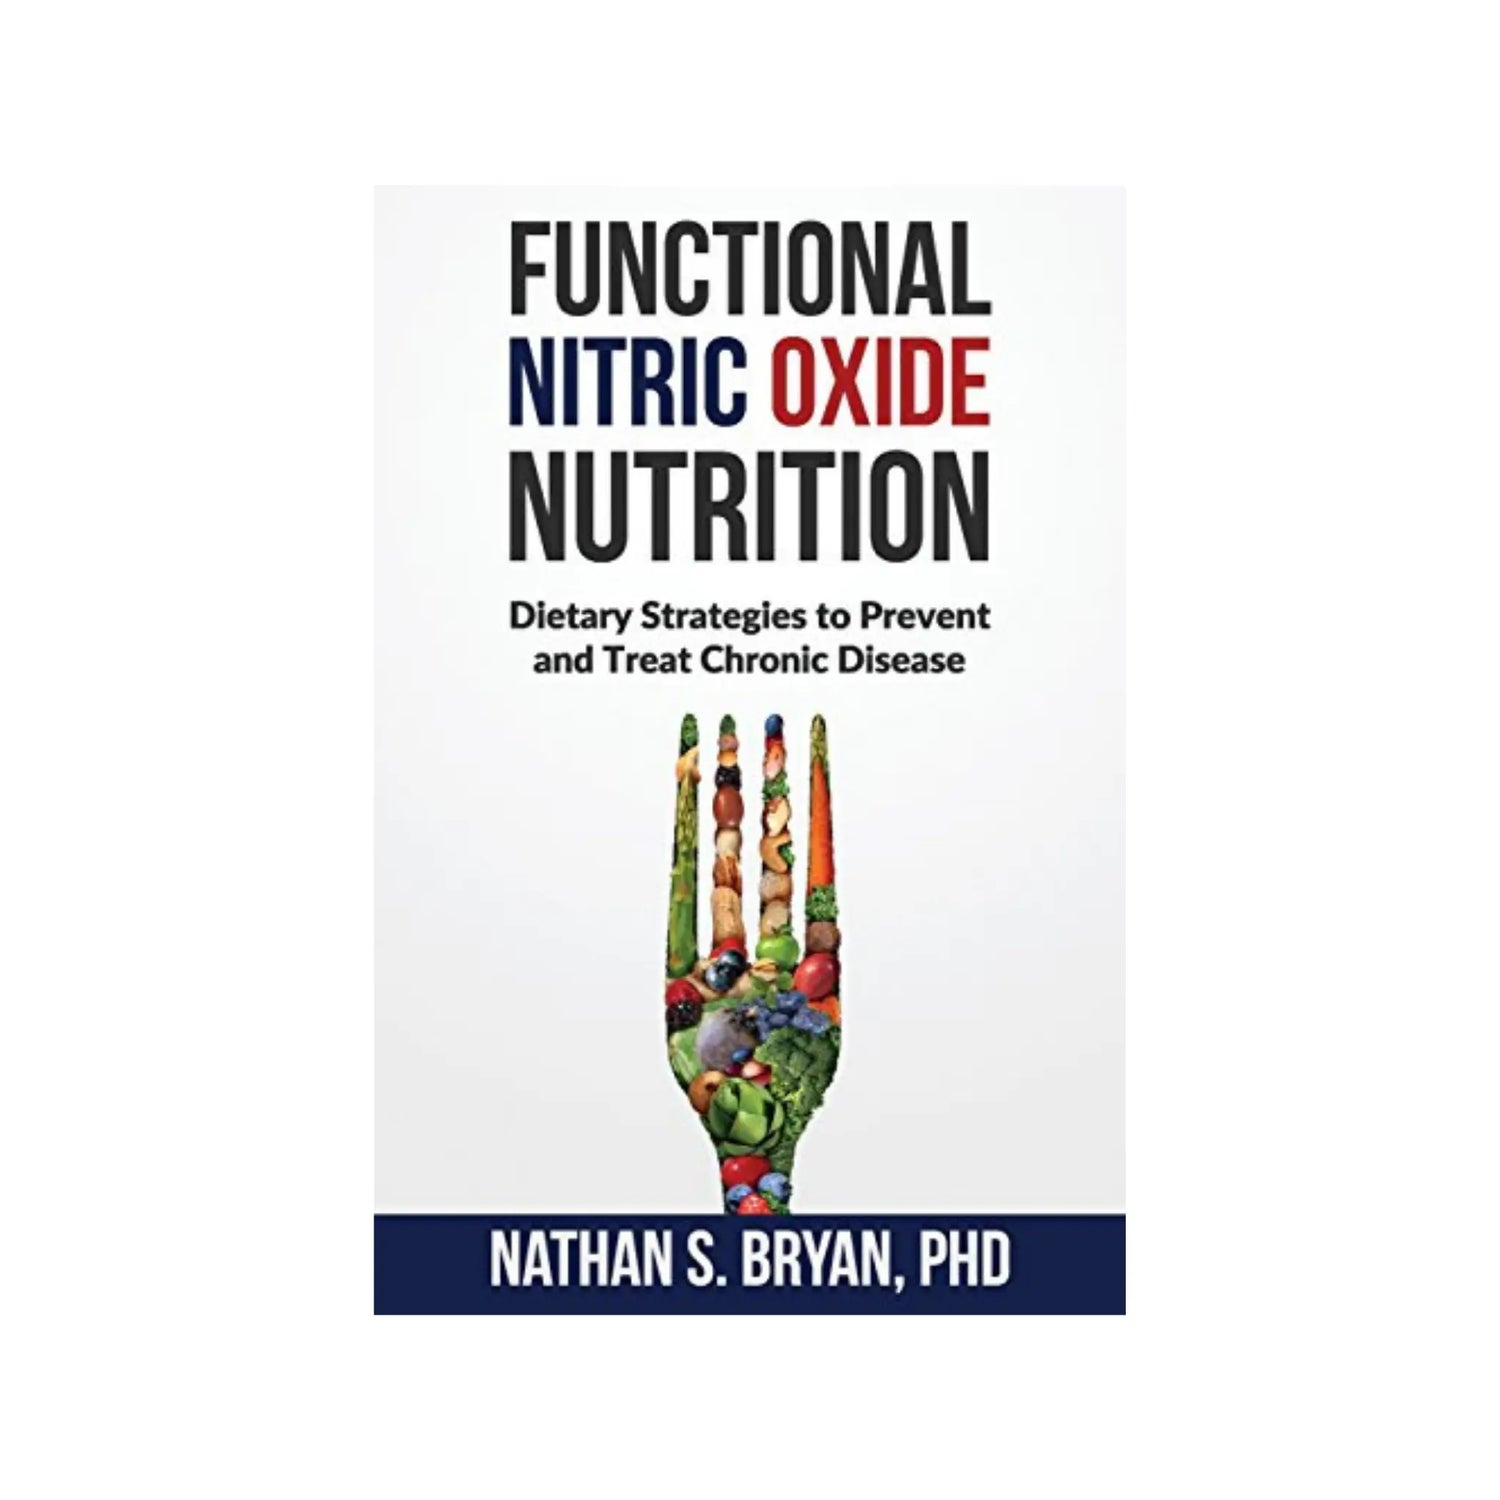 photo of the book functional nitric oxide nutrition